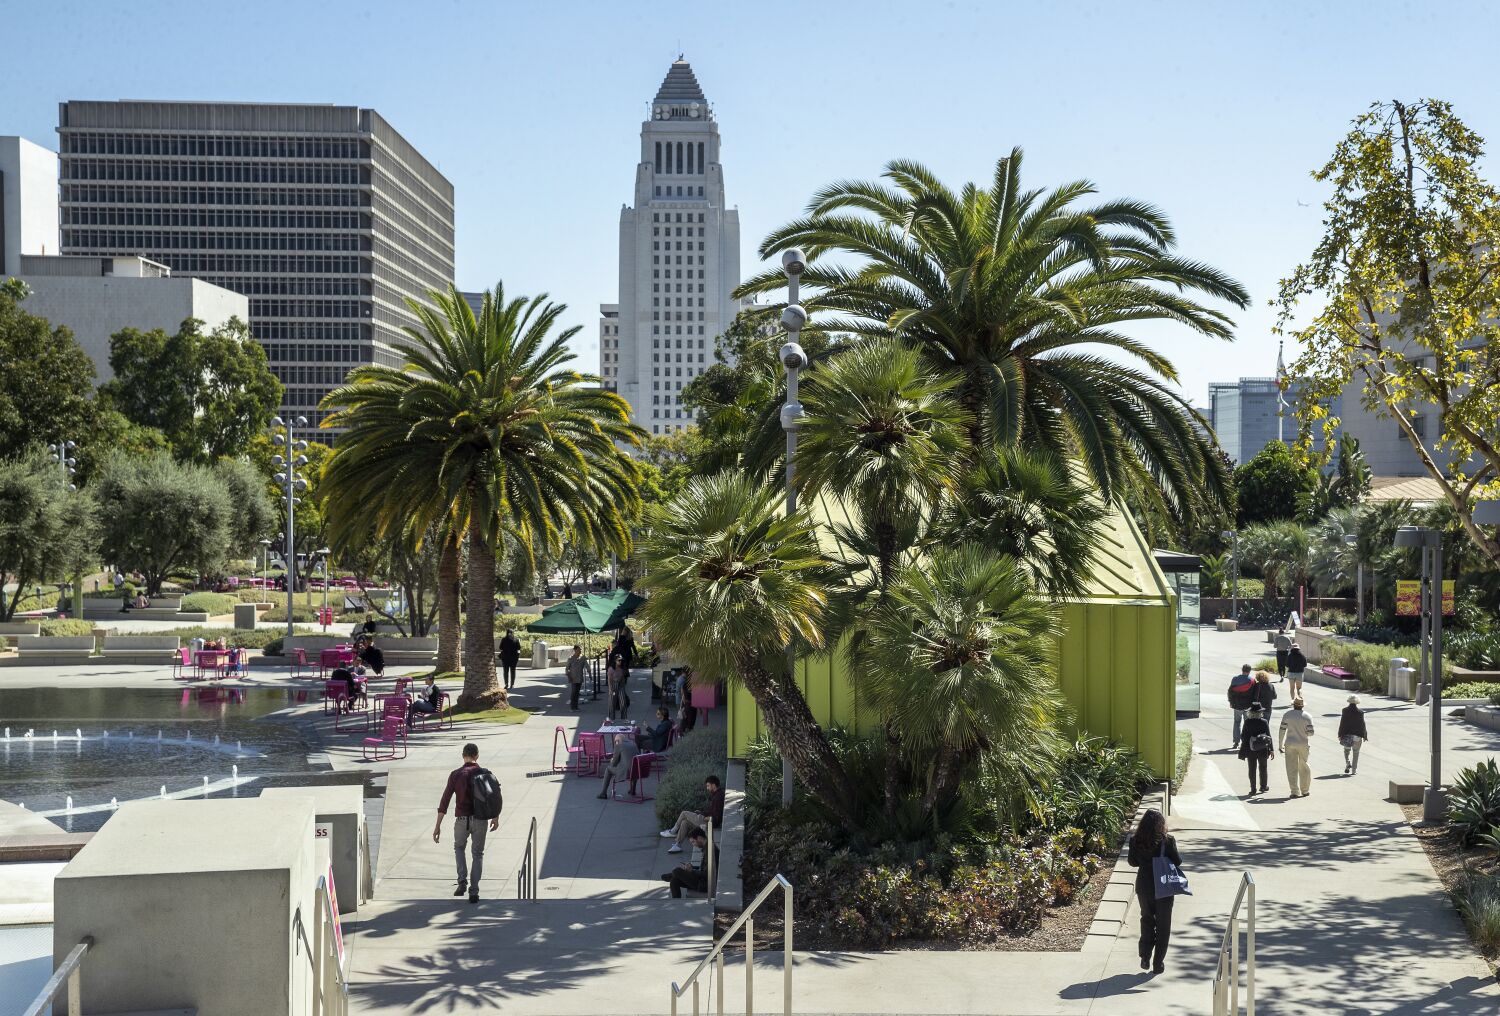 Downtown L.A.'s Grand Park to be renamed in honor of longtime Supervisor Gloria Molina